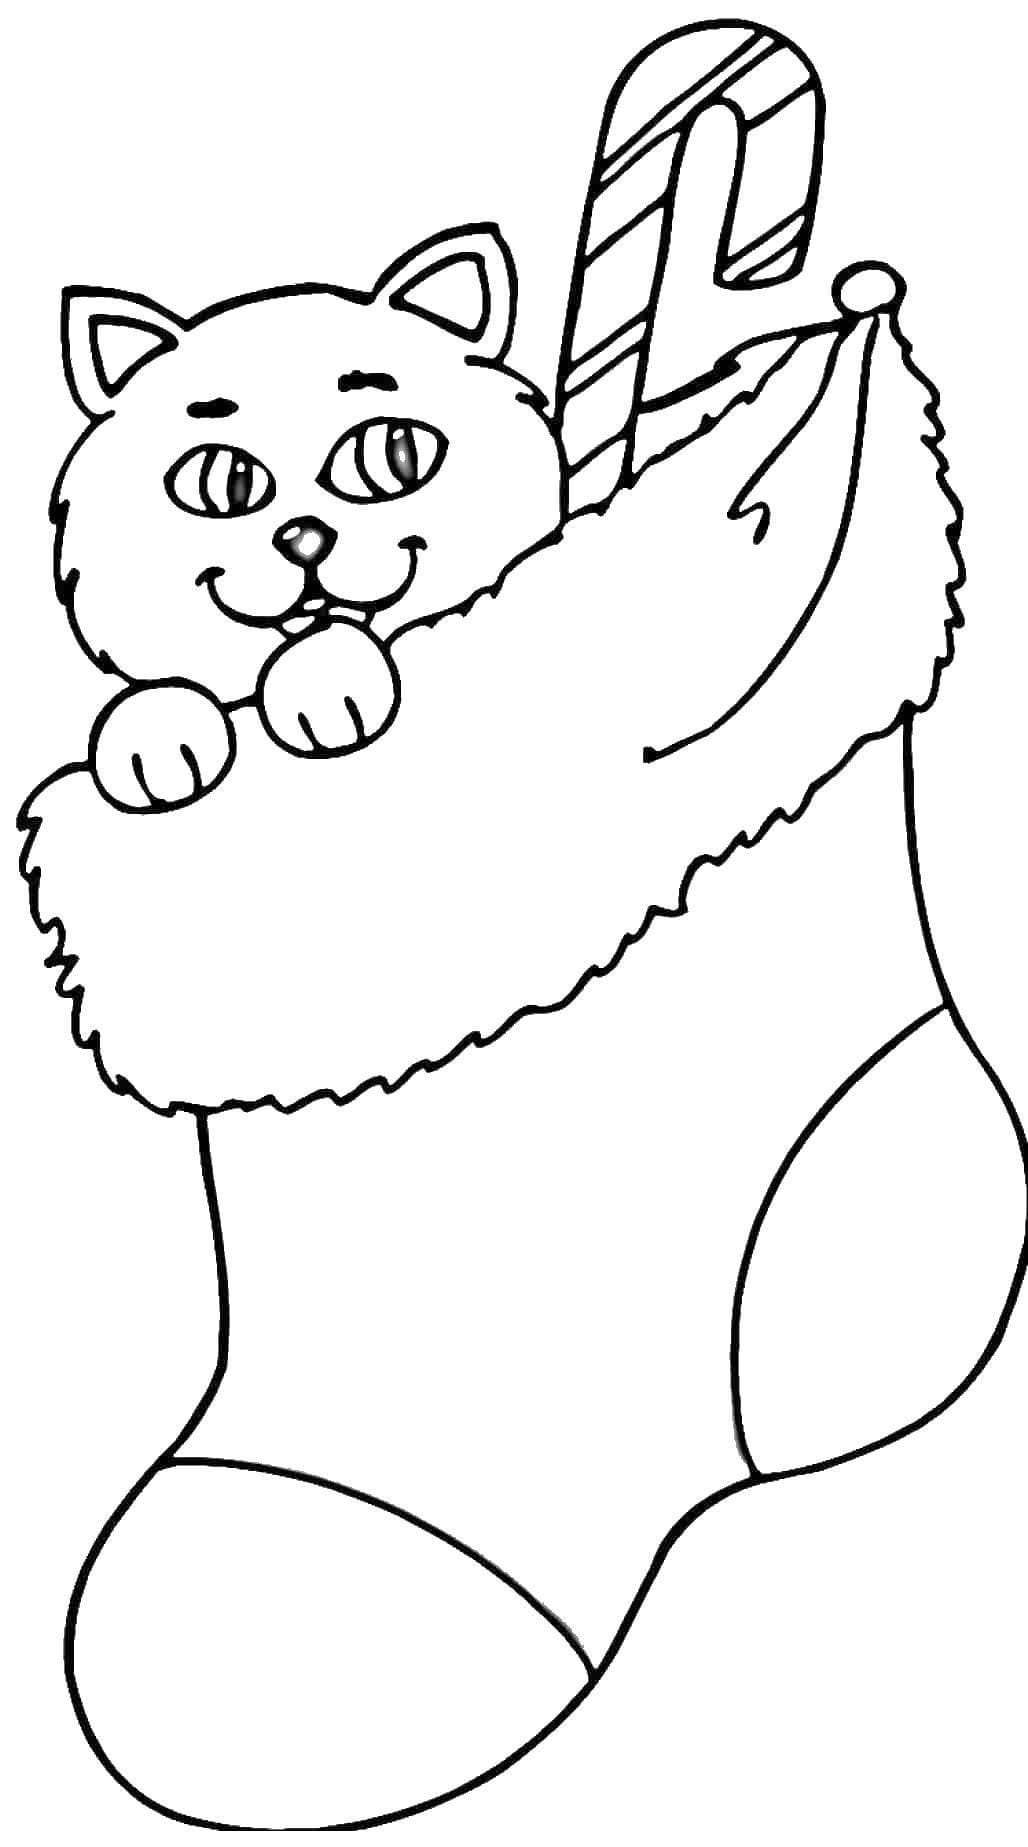 Bear And Candy In Christmas Stockings Coloring Page